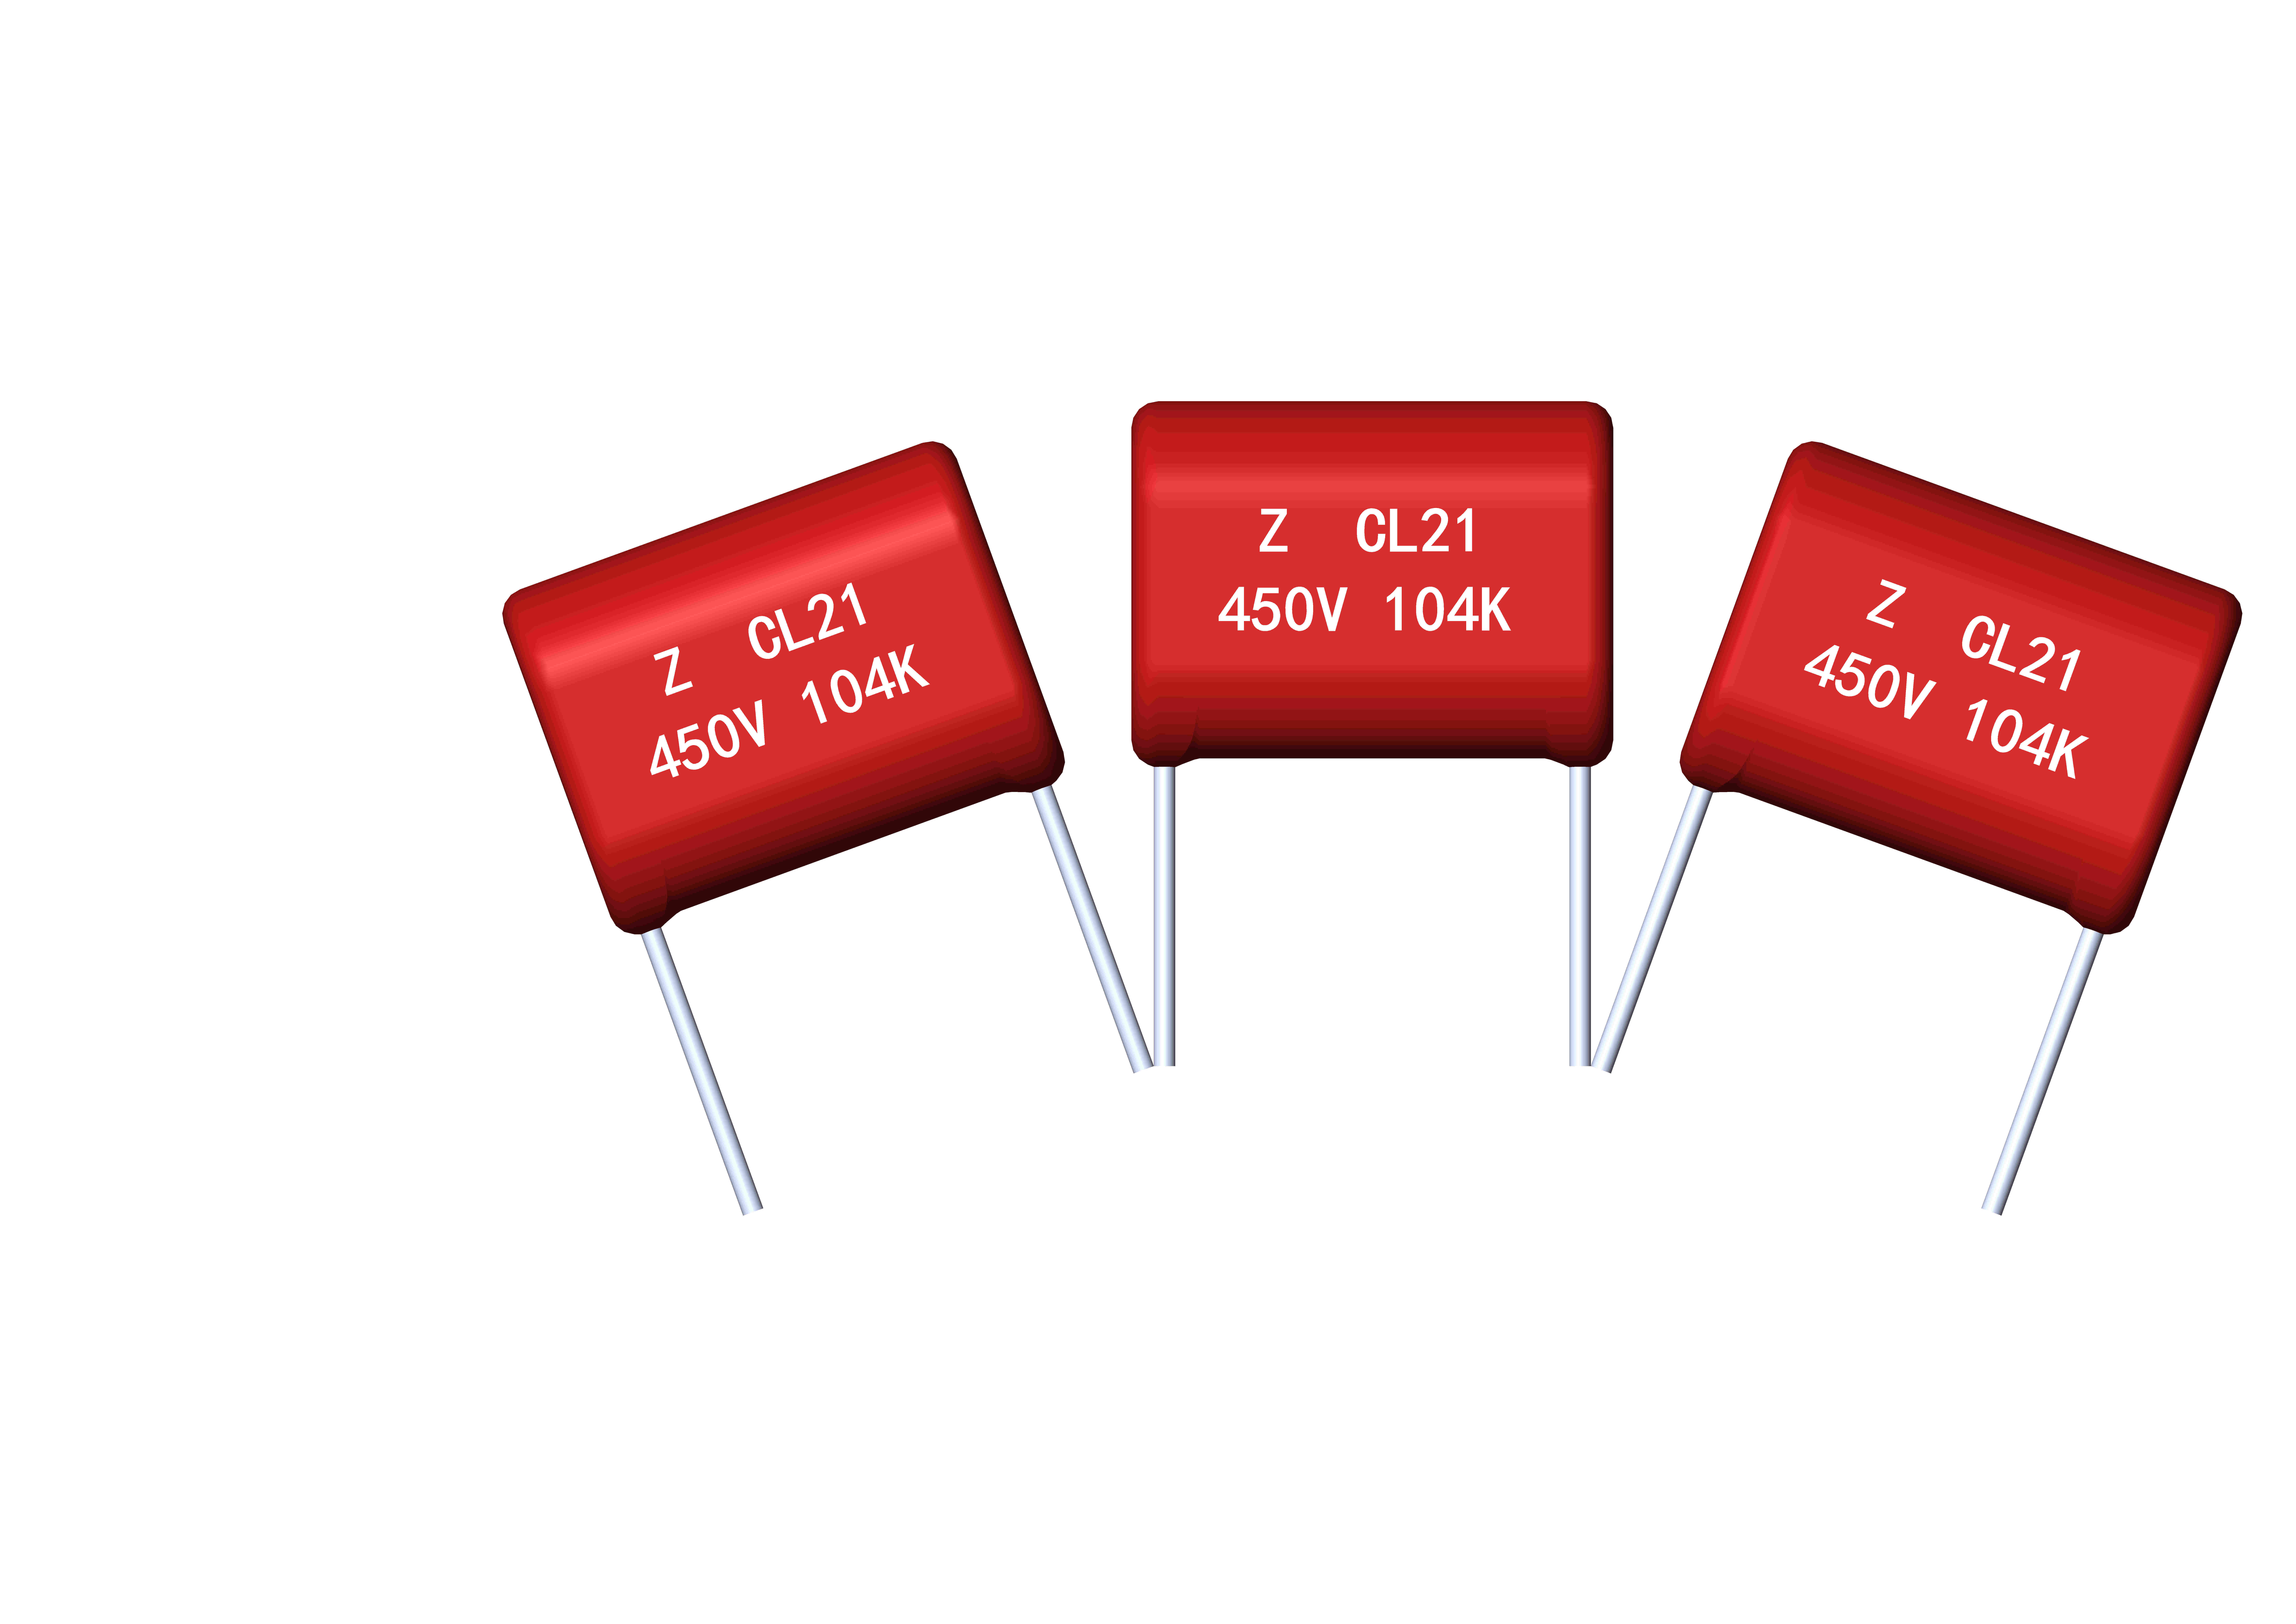 CL21_Metallized polyester film capacitor (Dipped)